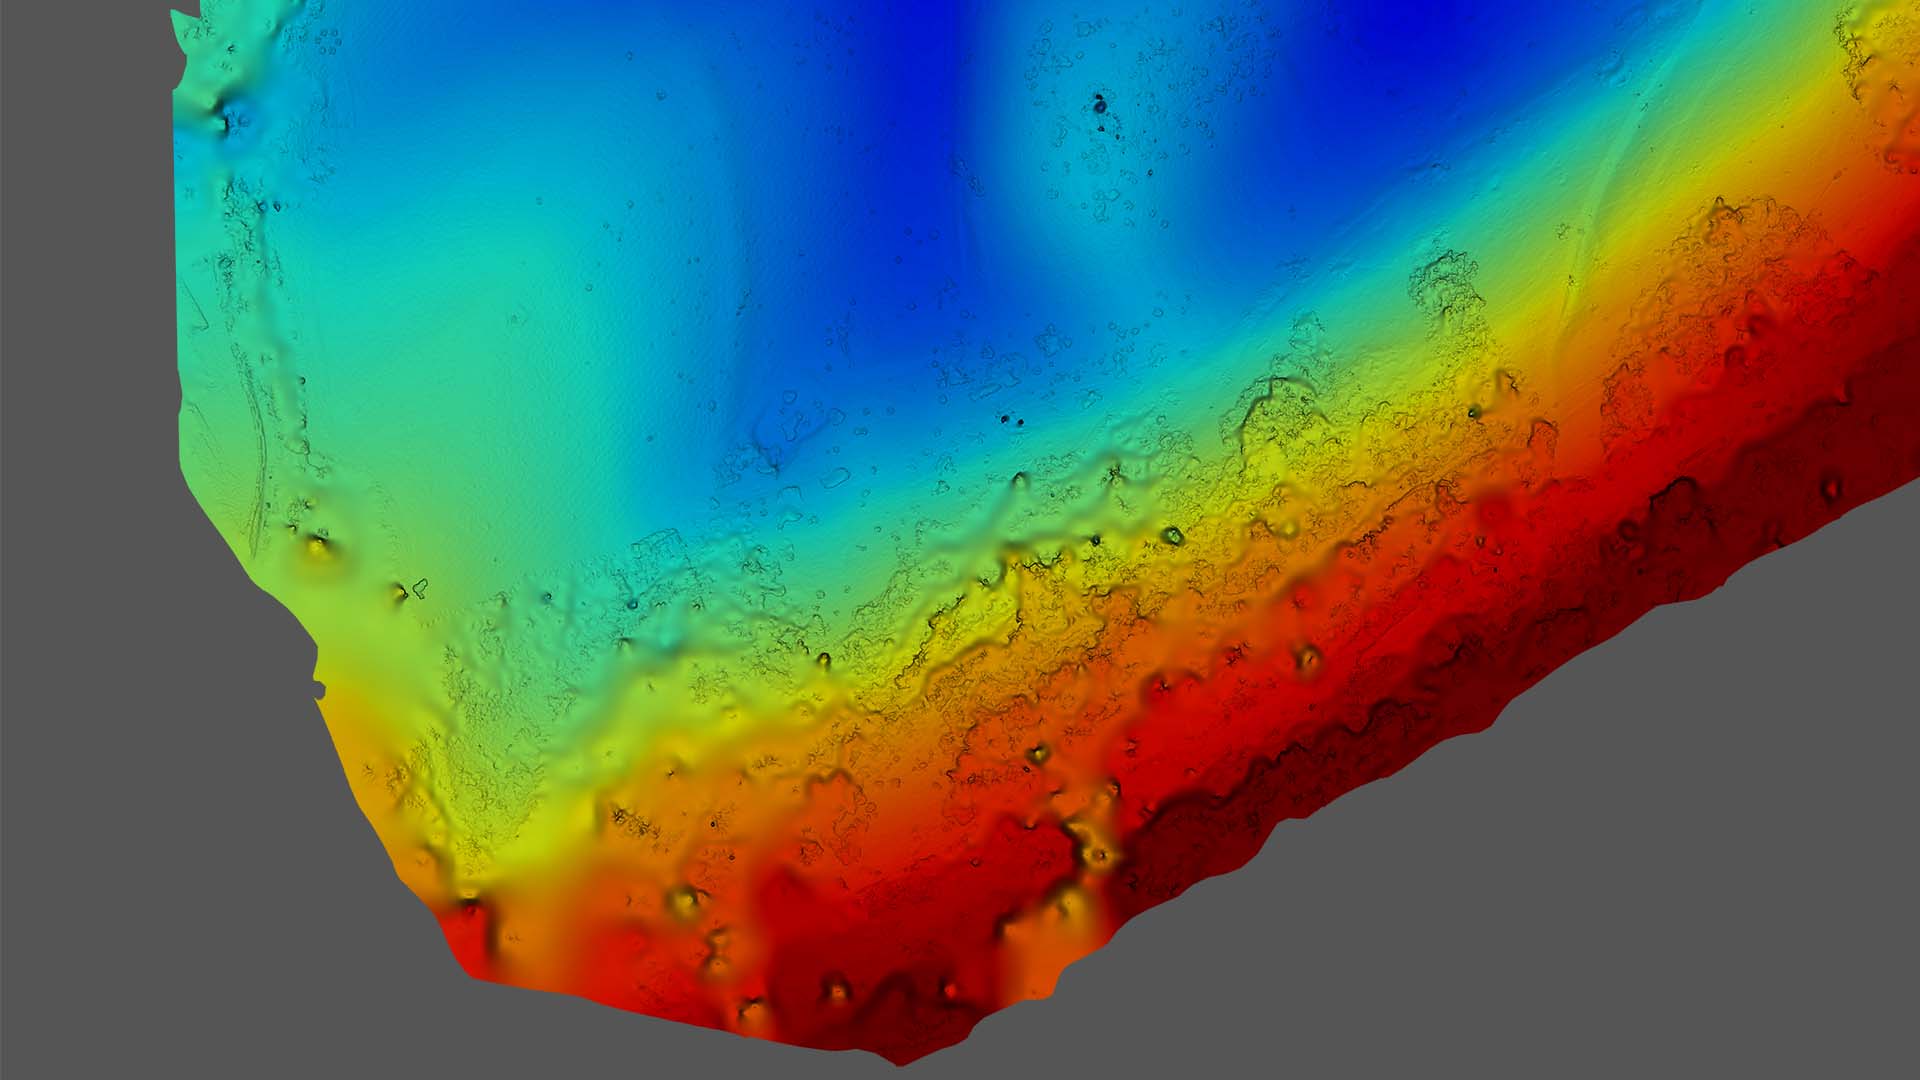 The Power of Drones: Exploring Elevation Models - DEMs and DSMs